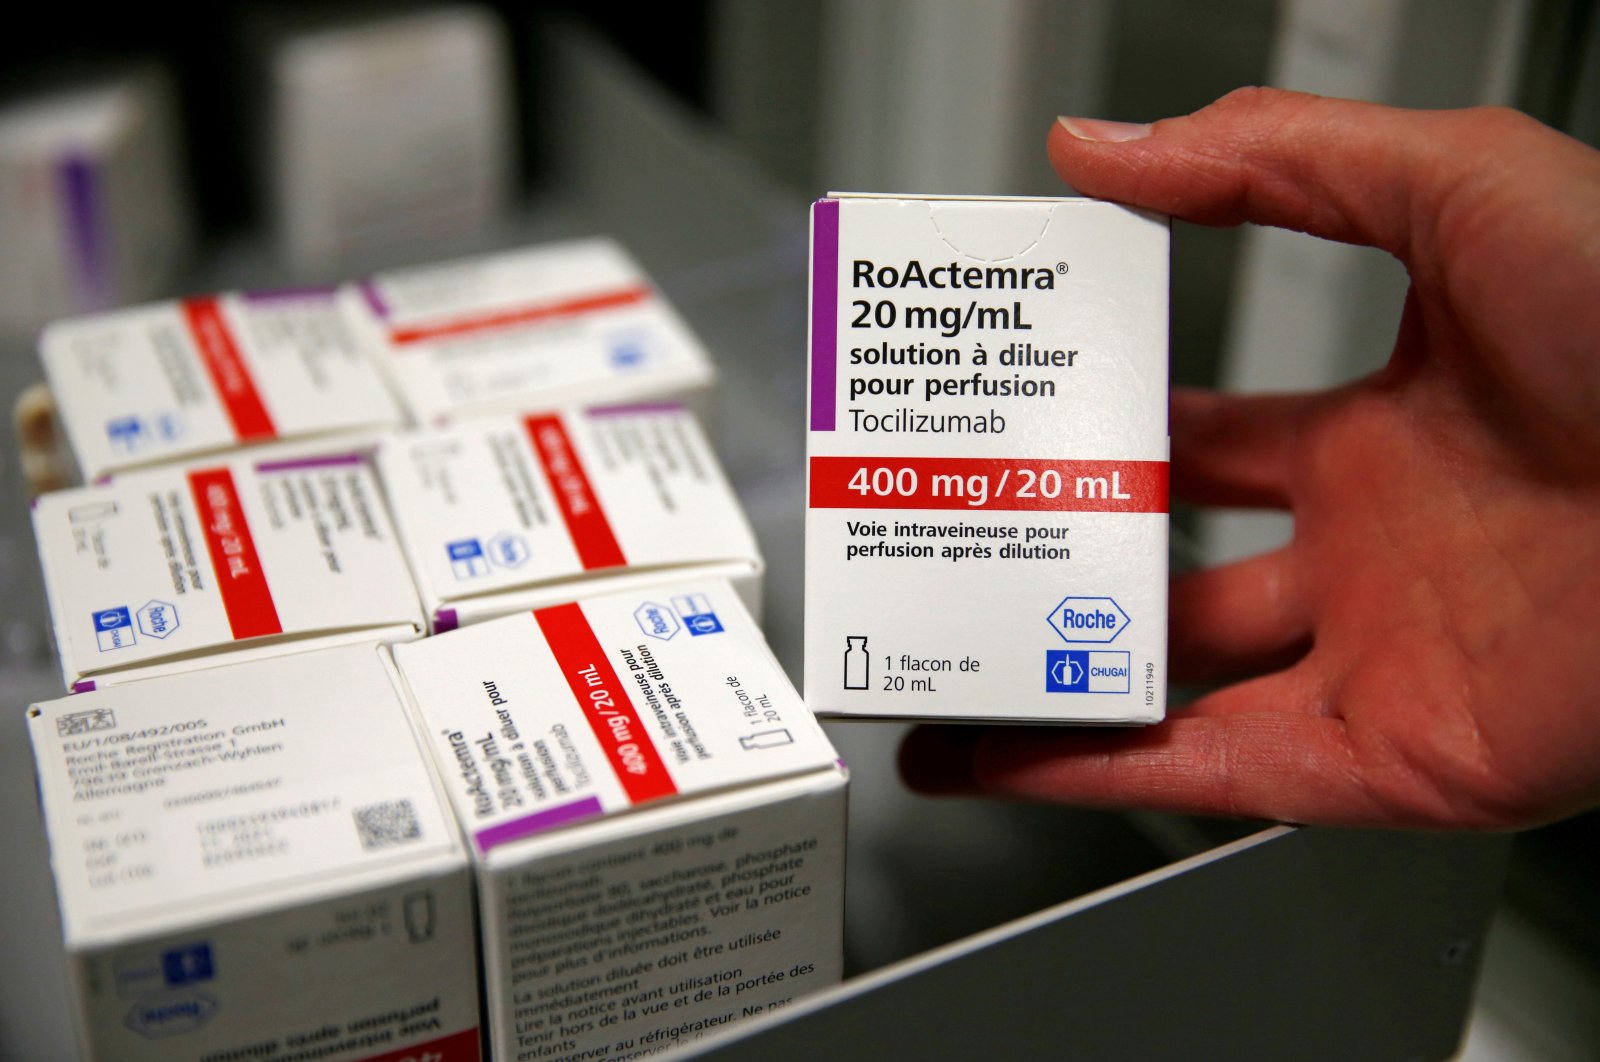 A pharmacist displays a box of tocilizumab, which is used in the treatment of rheumatoid arthritis, at the Cambrai hospital pharmacy, Cambrai, France, April 28, 2020. (REUTERS Photo)